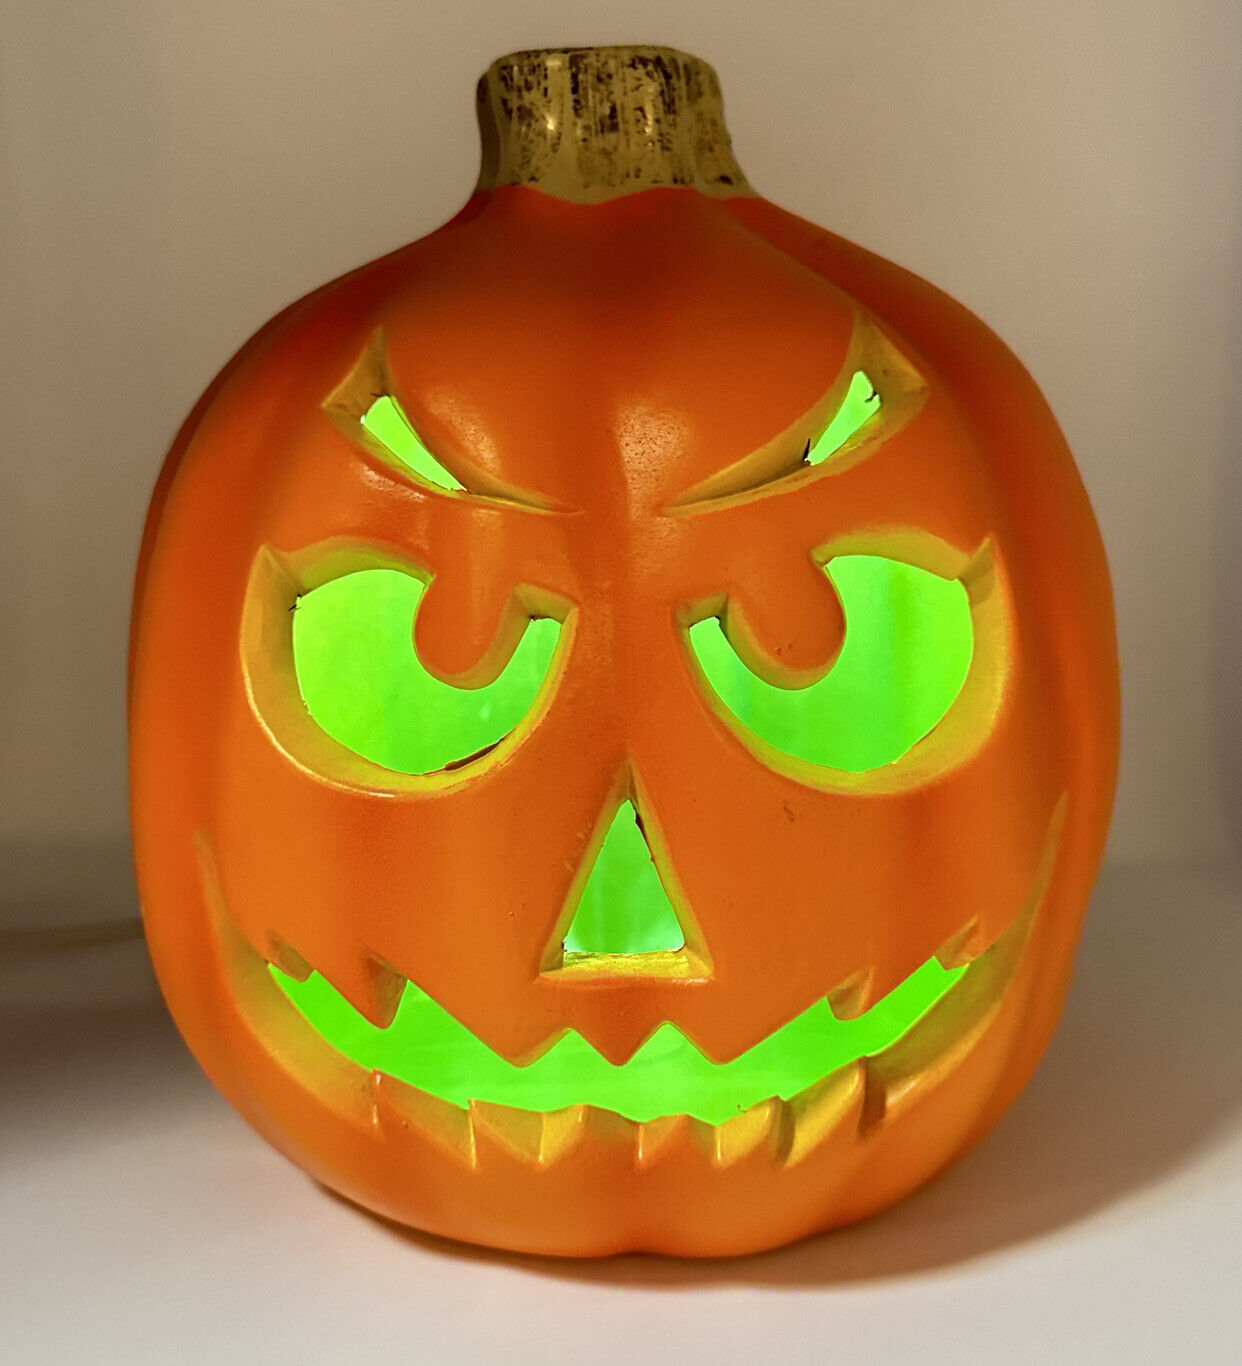 Scary Angry Mean Blow Mold Pumpkin Halloween Magic Light Up